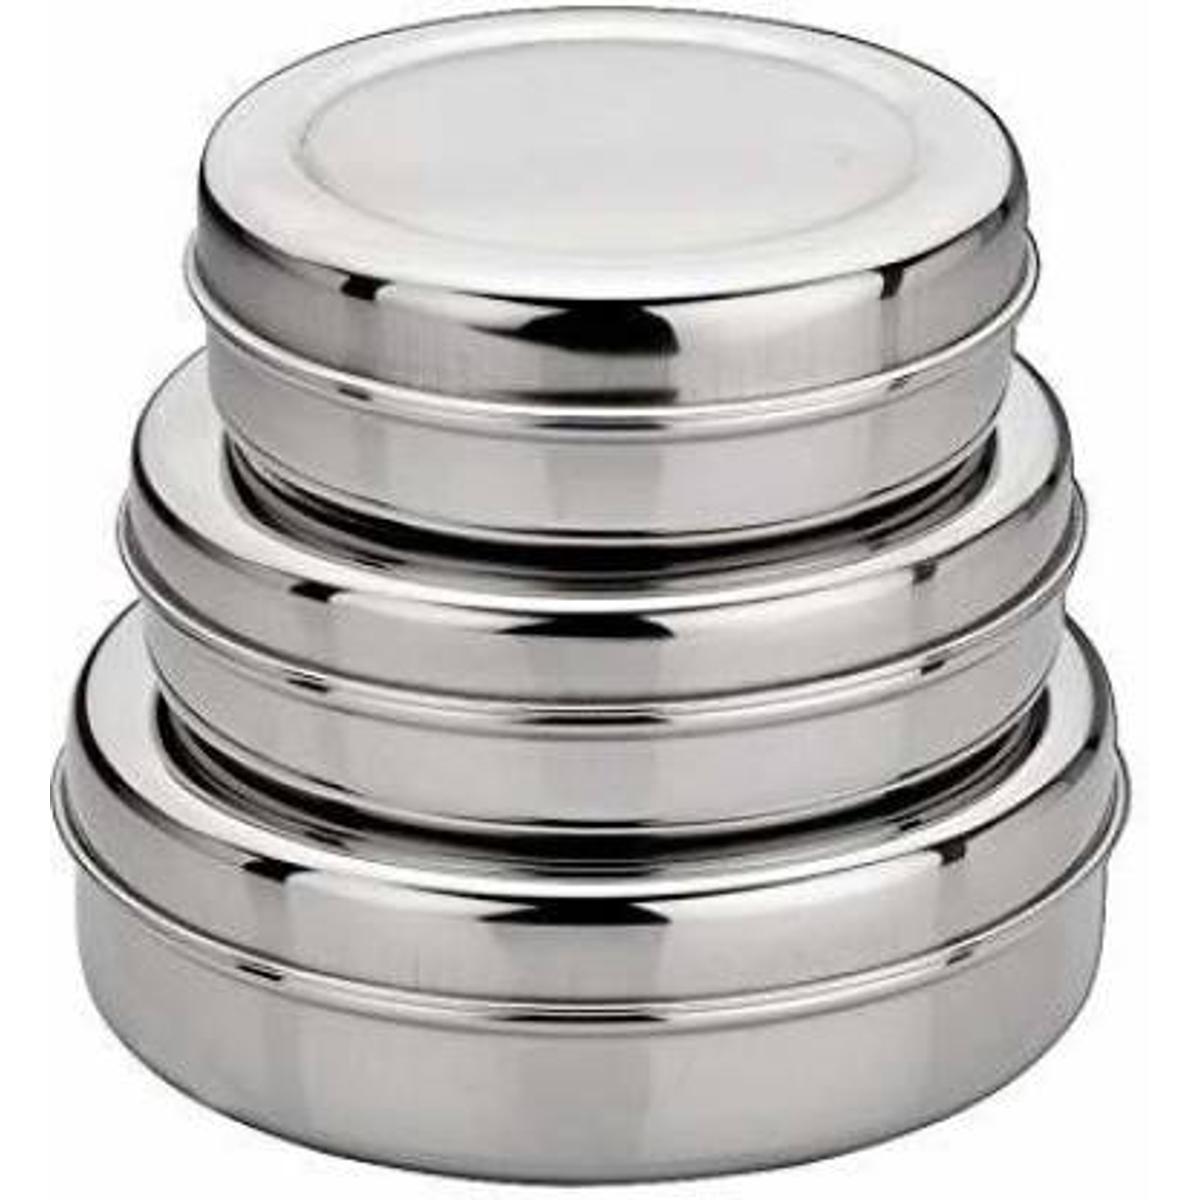 steel container / puri dabba set of 3 - 500 ml, 1000 ml, 1500 ml Steel Utility Container (Pack of 3, Silver)